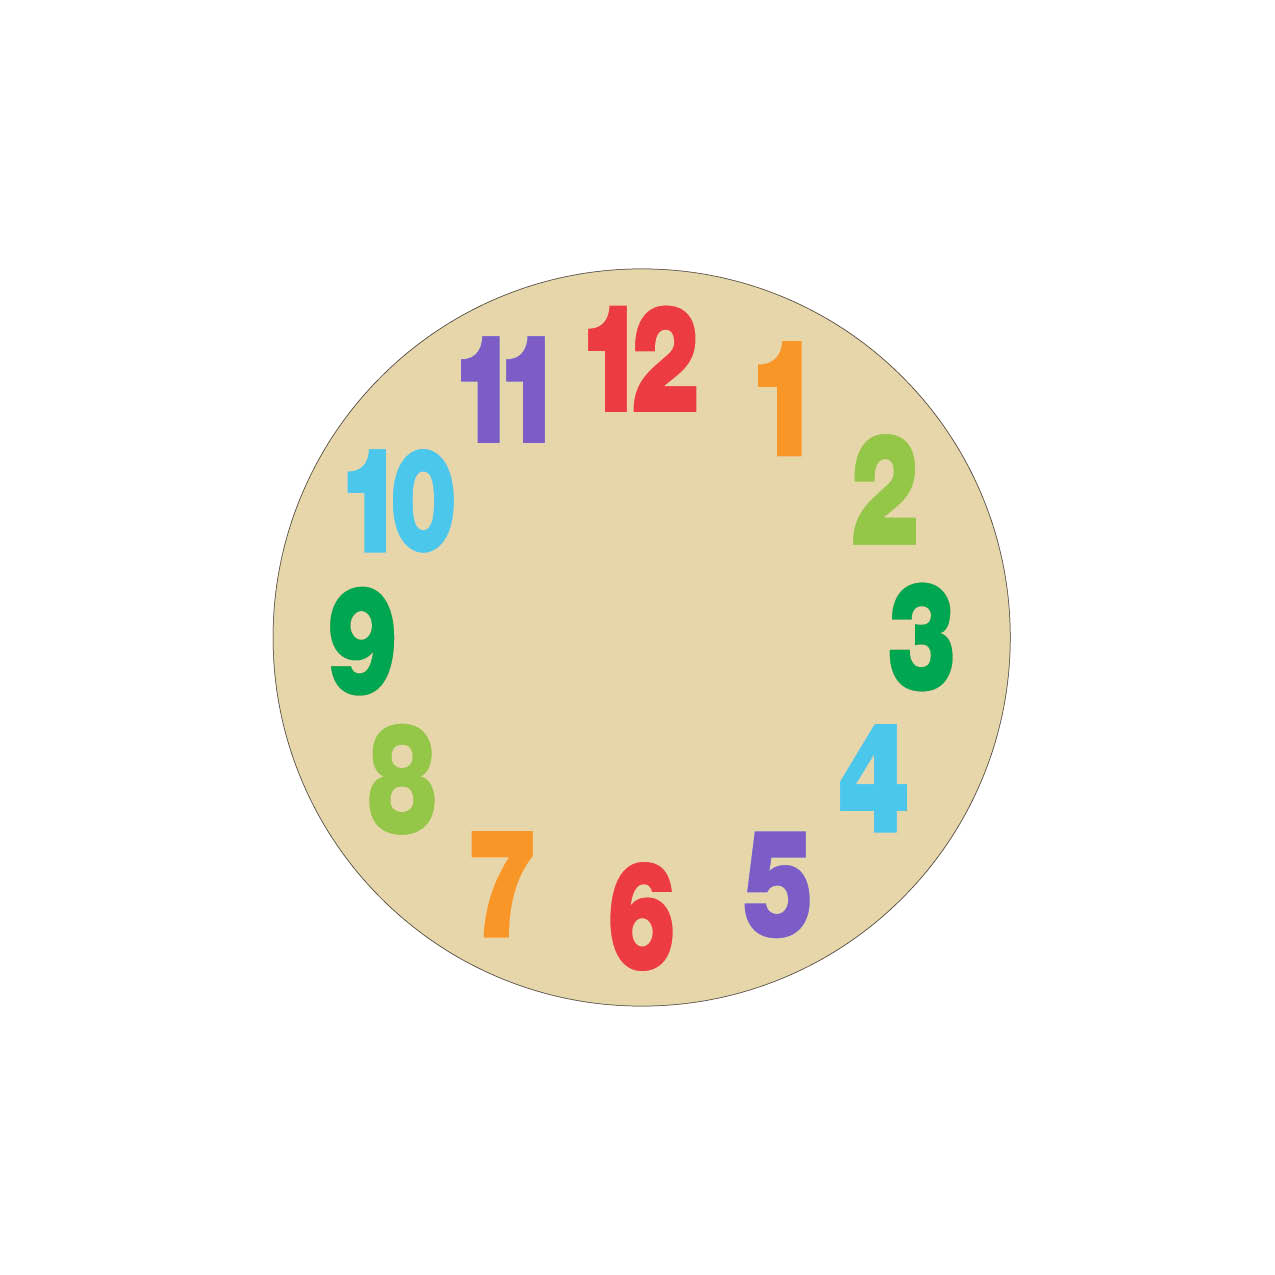 Printable Clock With Hands